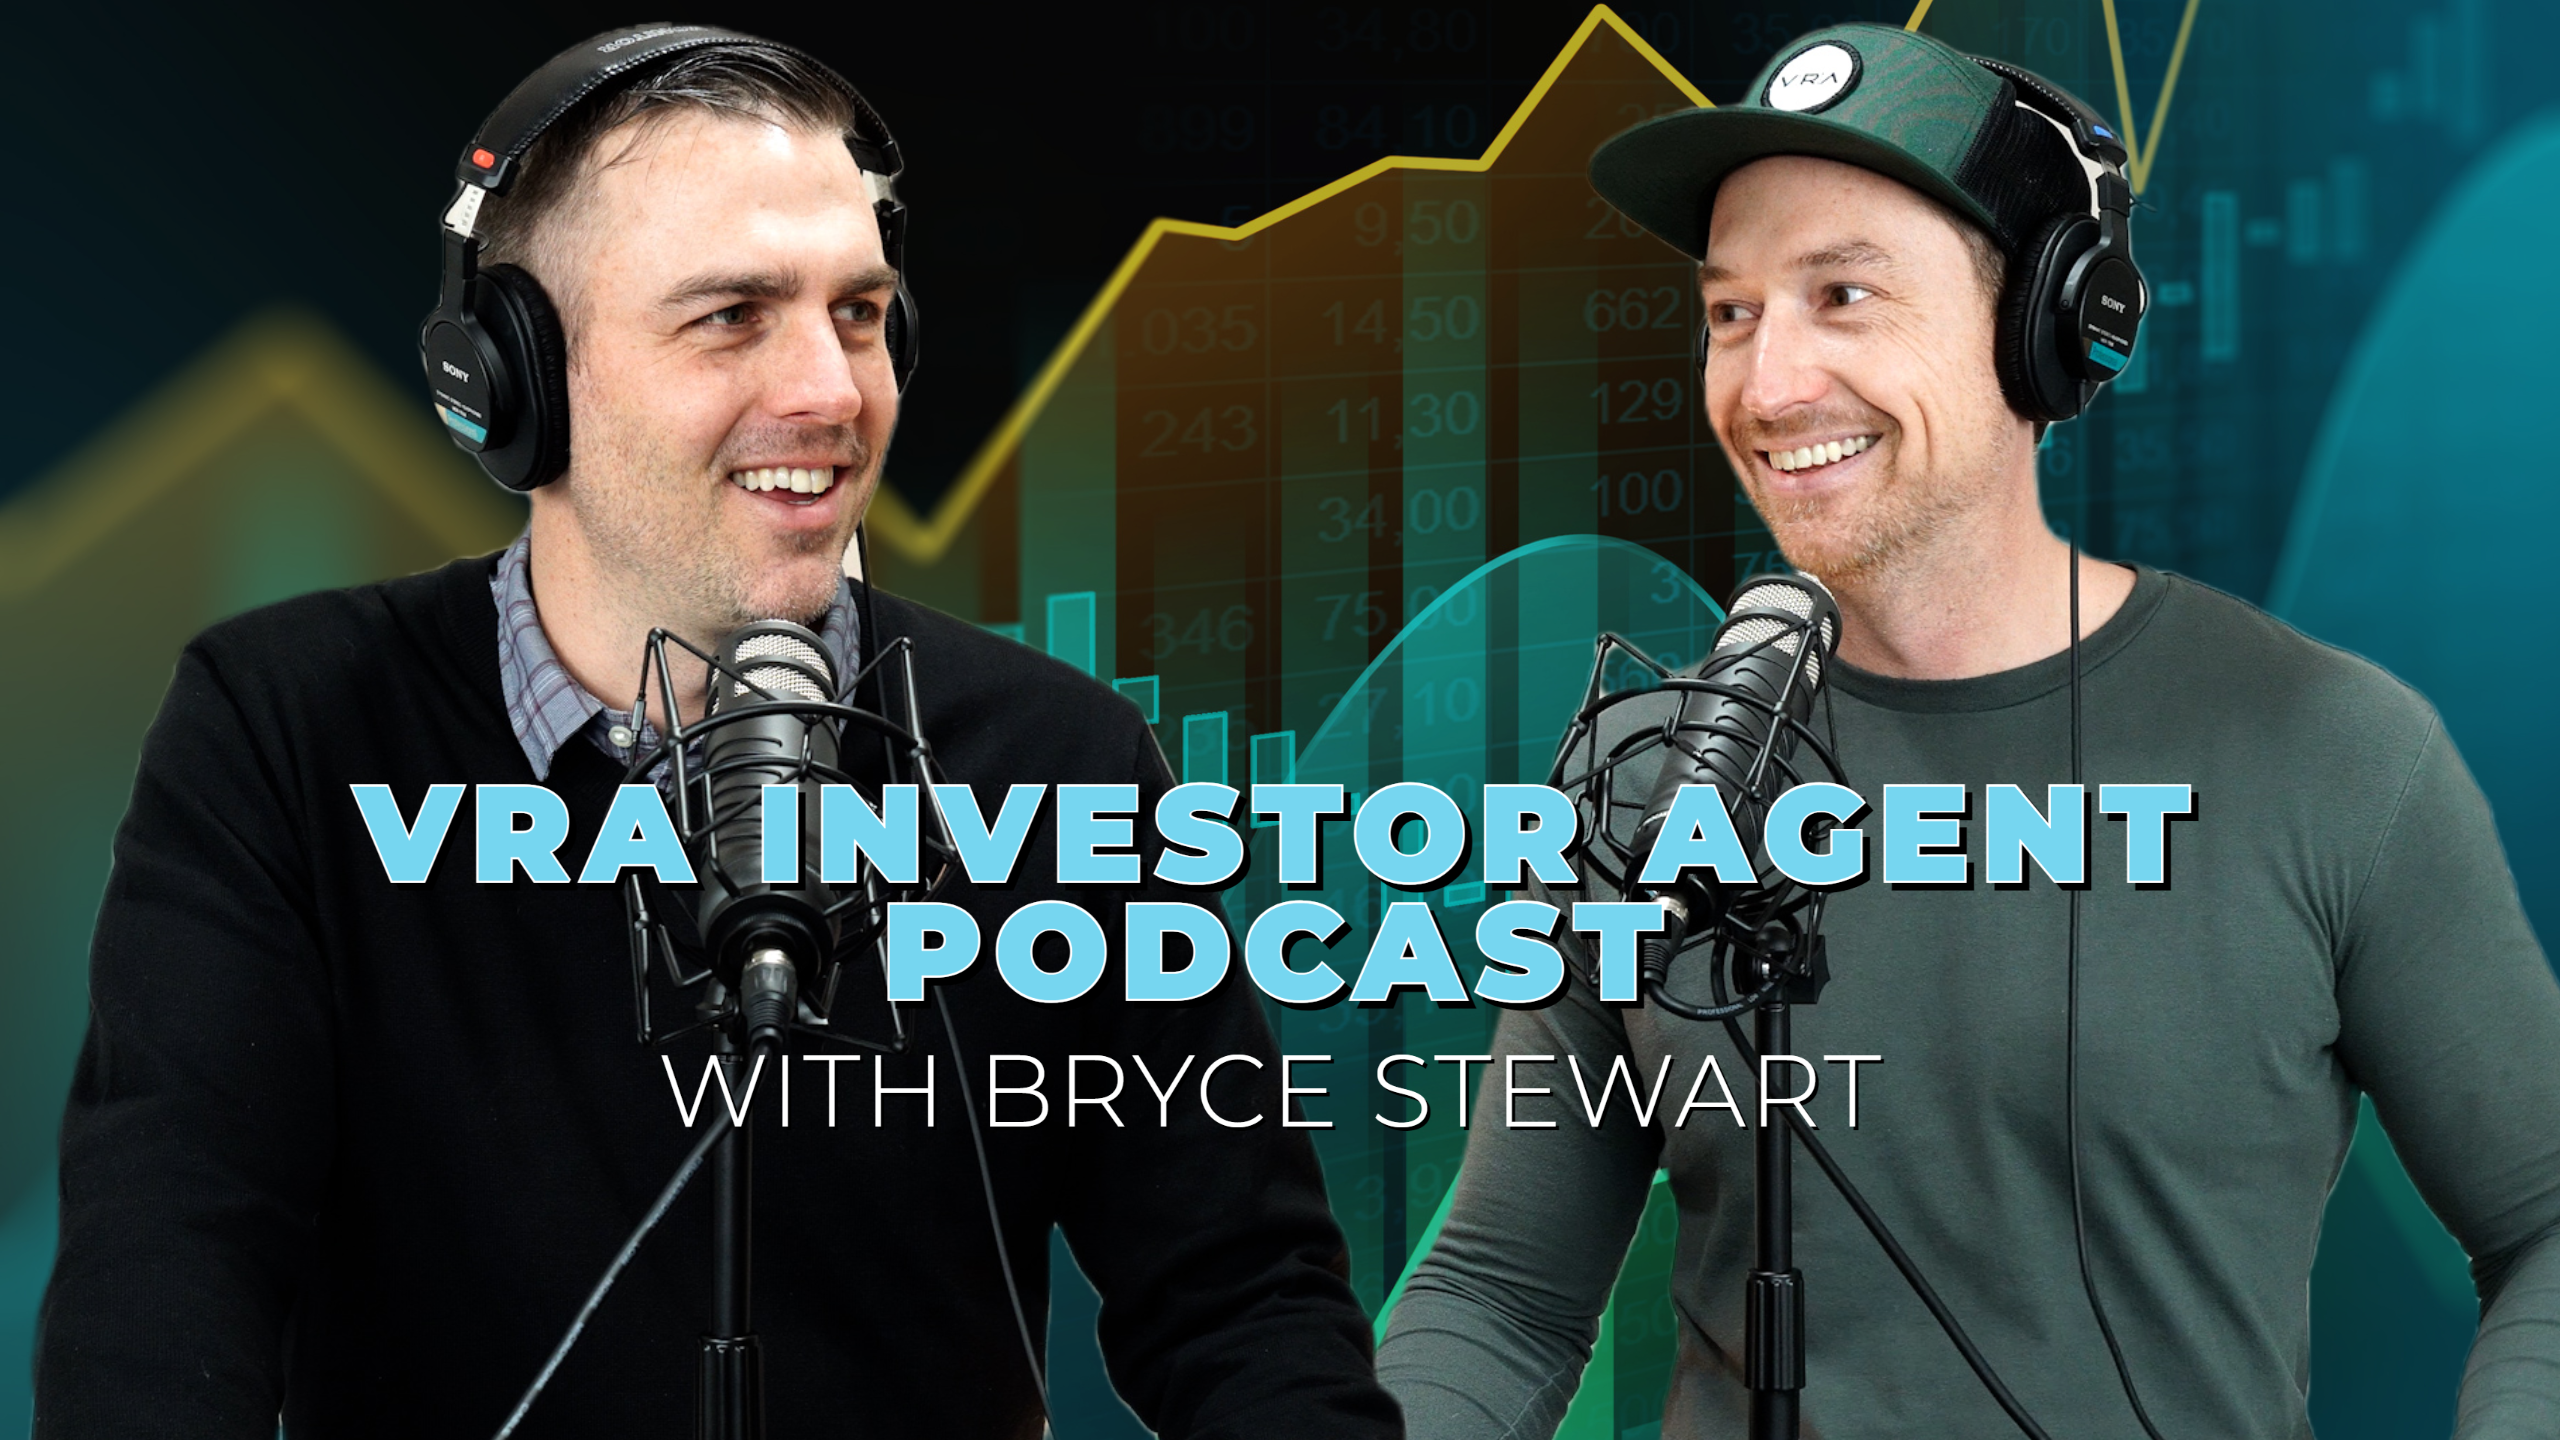 Making $20K per month in Real Estate with Bryce Stewart